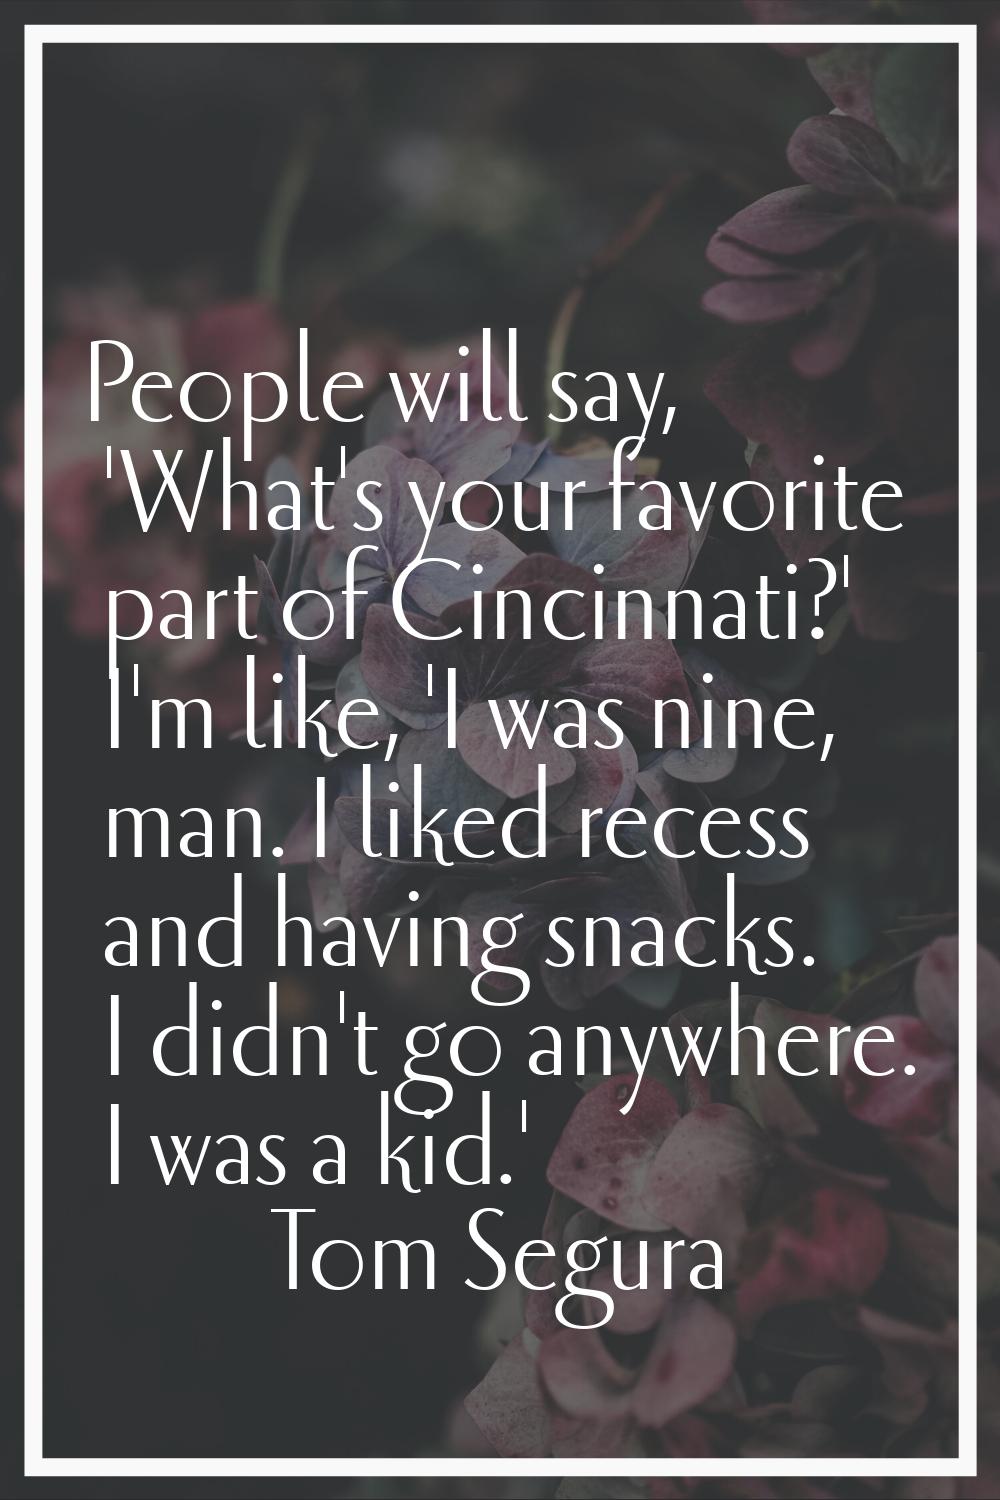 People will say, 'What's your favorite part of Cincinnati?' I'm like, 'I was nine, man. I liked rec